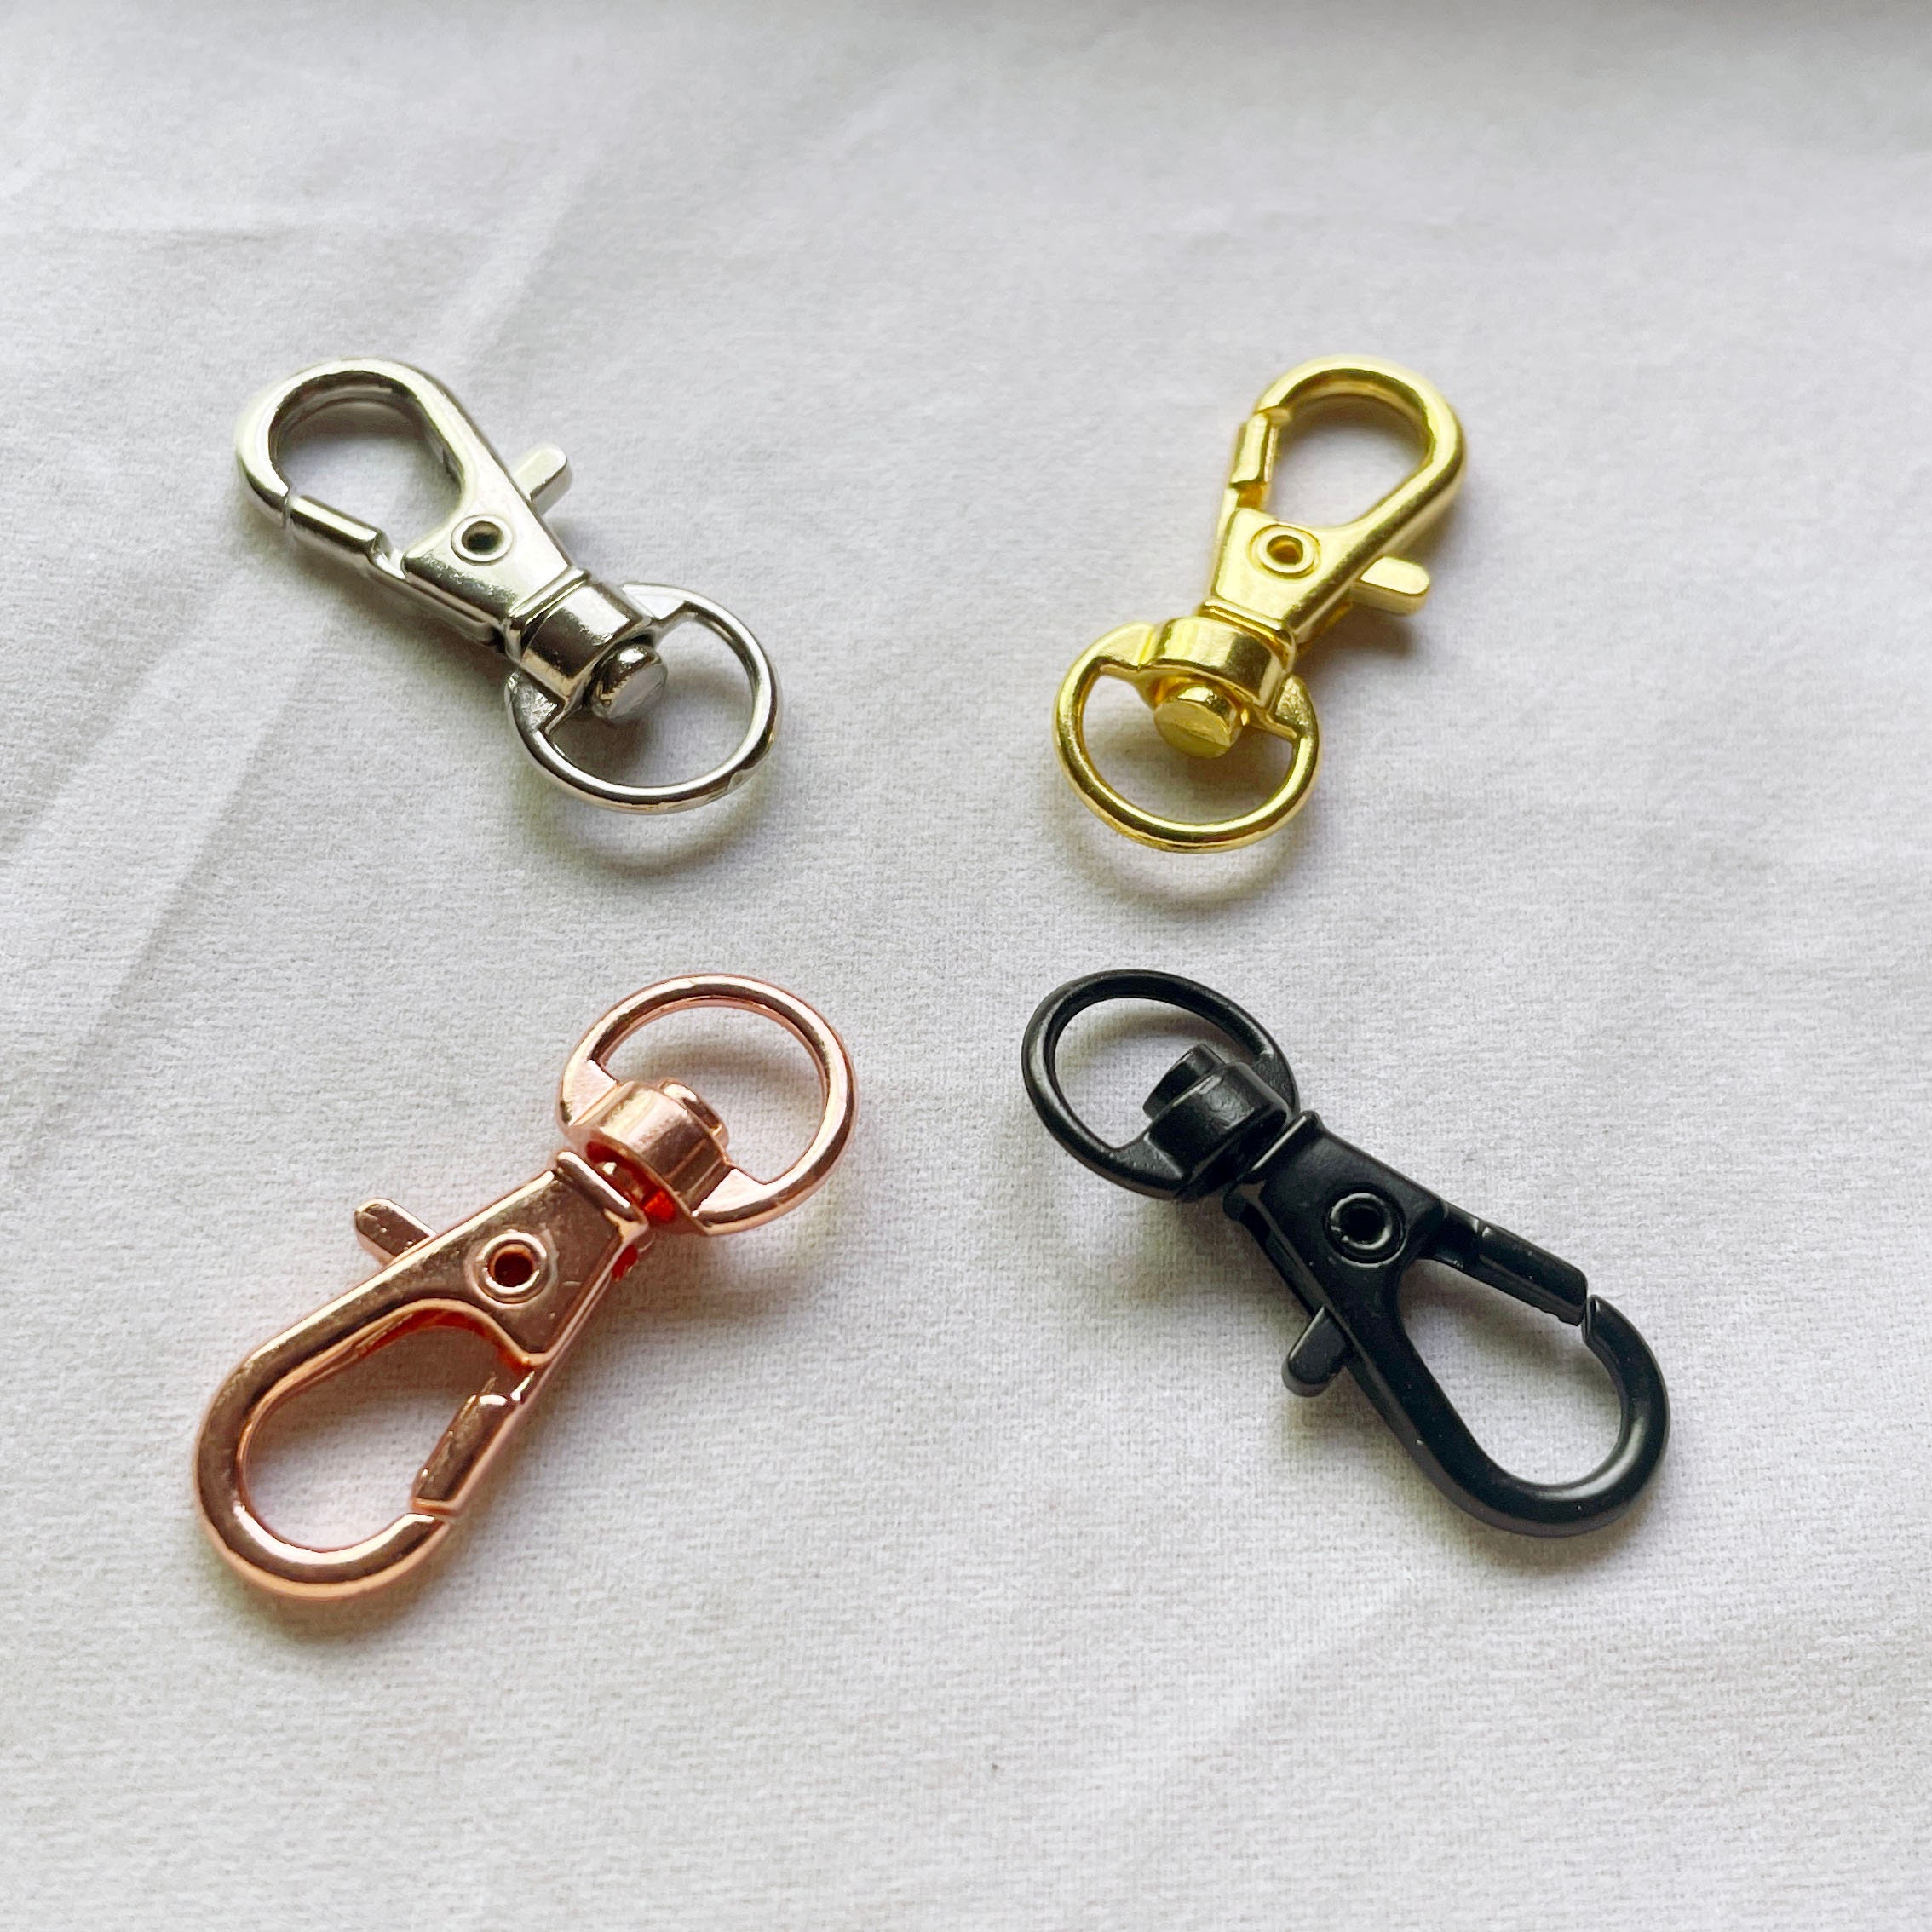 1 or 3 Gold, Silver, Black, Bronze Keychain, Carabiner Spring Clasp With  O-ring Spring Clasp, Swivel Ring, Dog Leash, Purse, Heavy-duty, 3in 